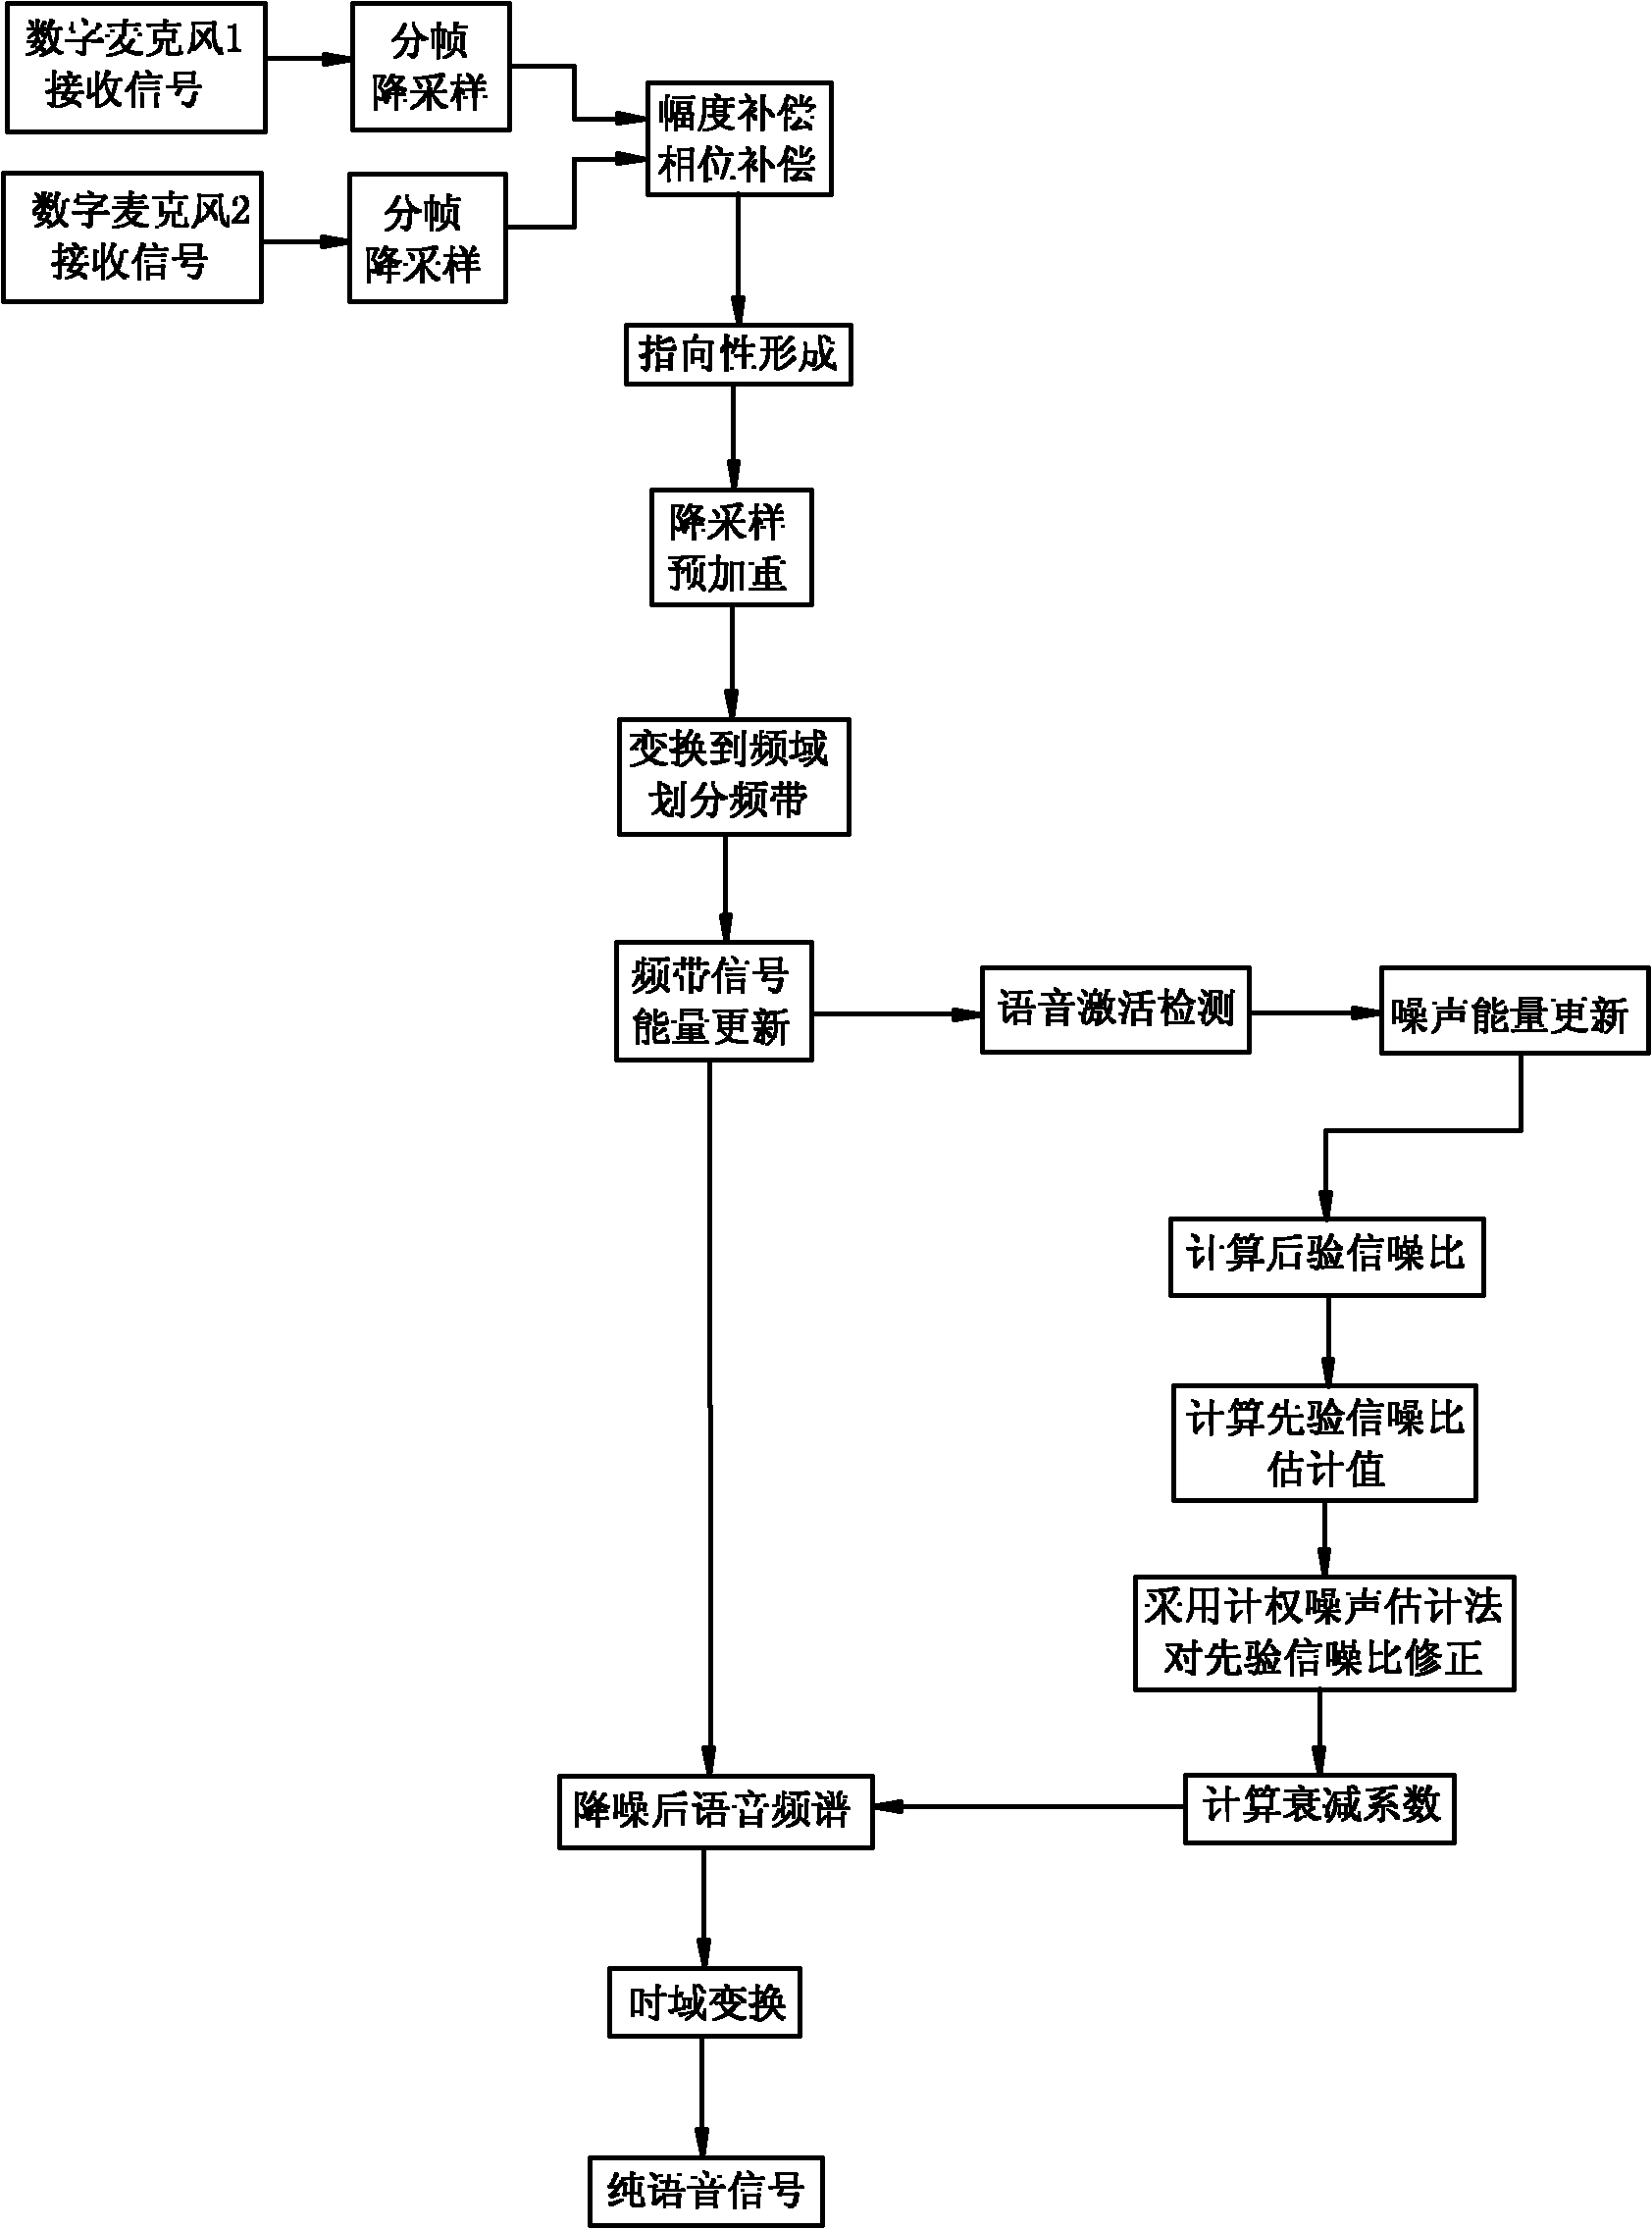 Dual-microphone based speech enhancement device and method